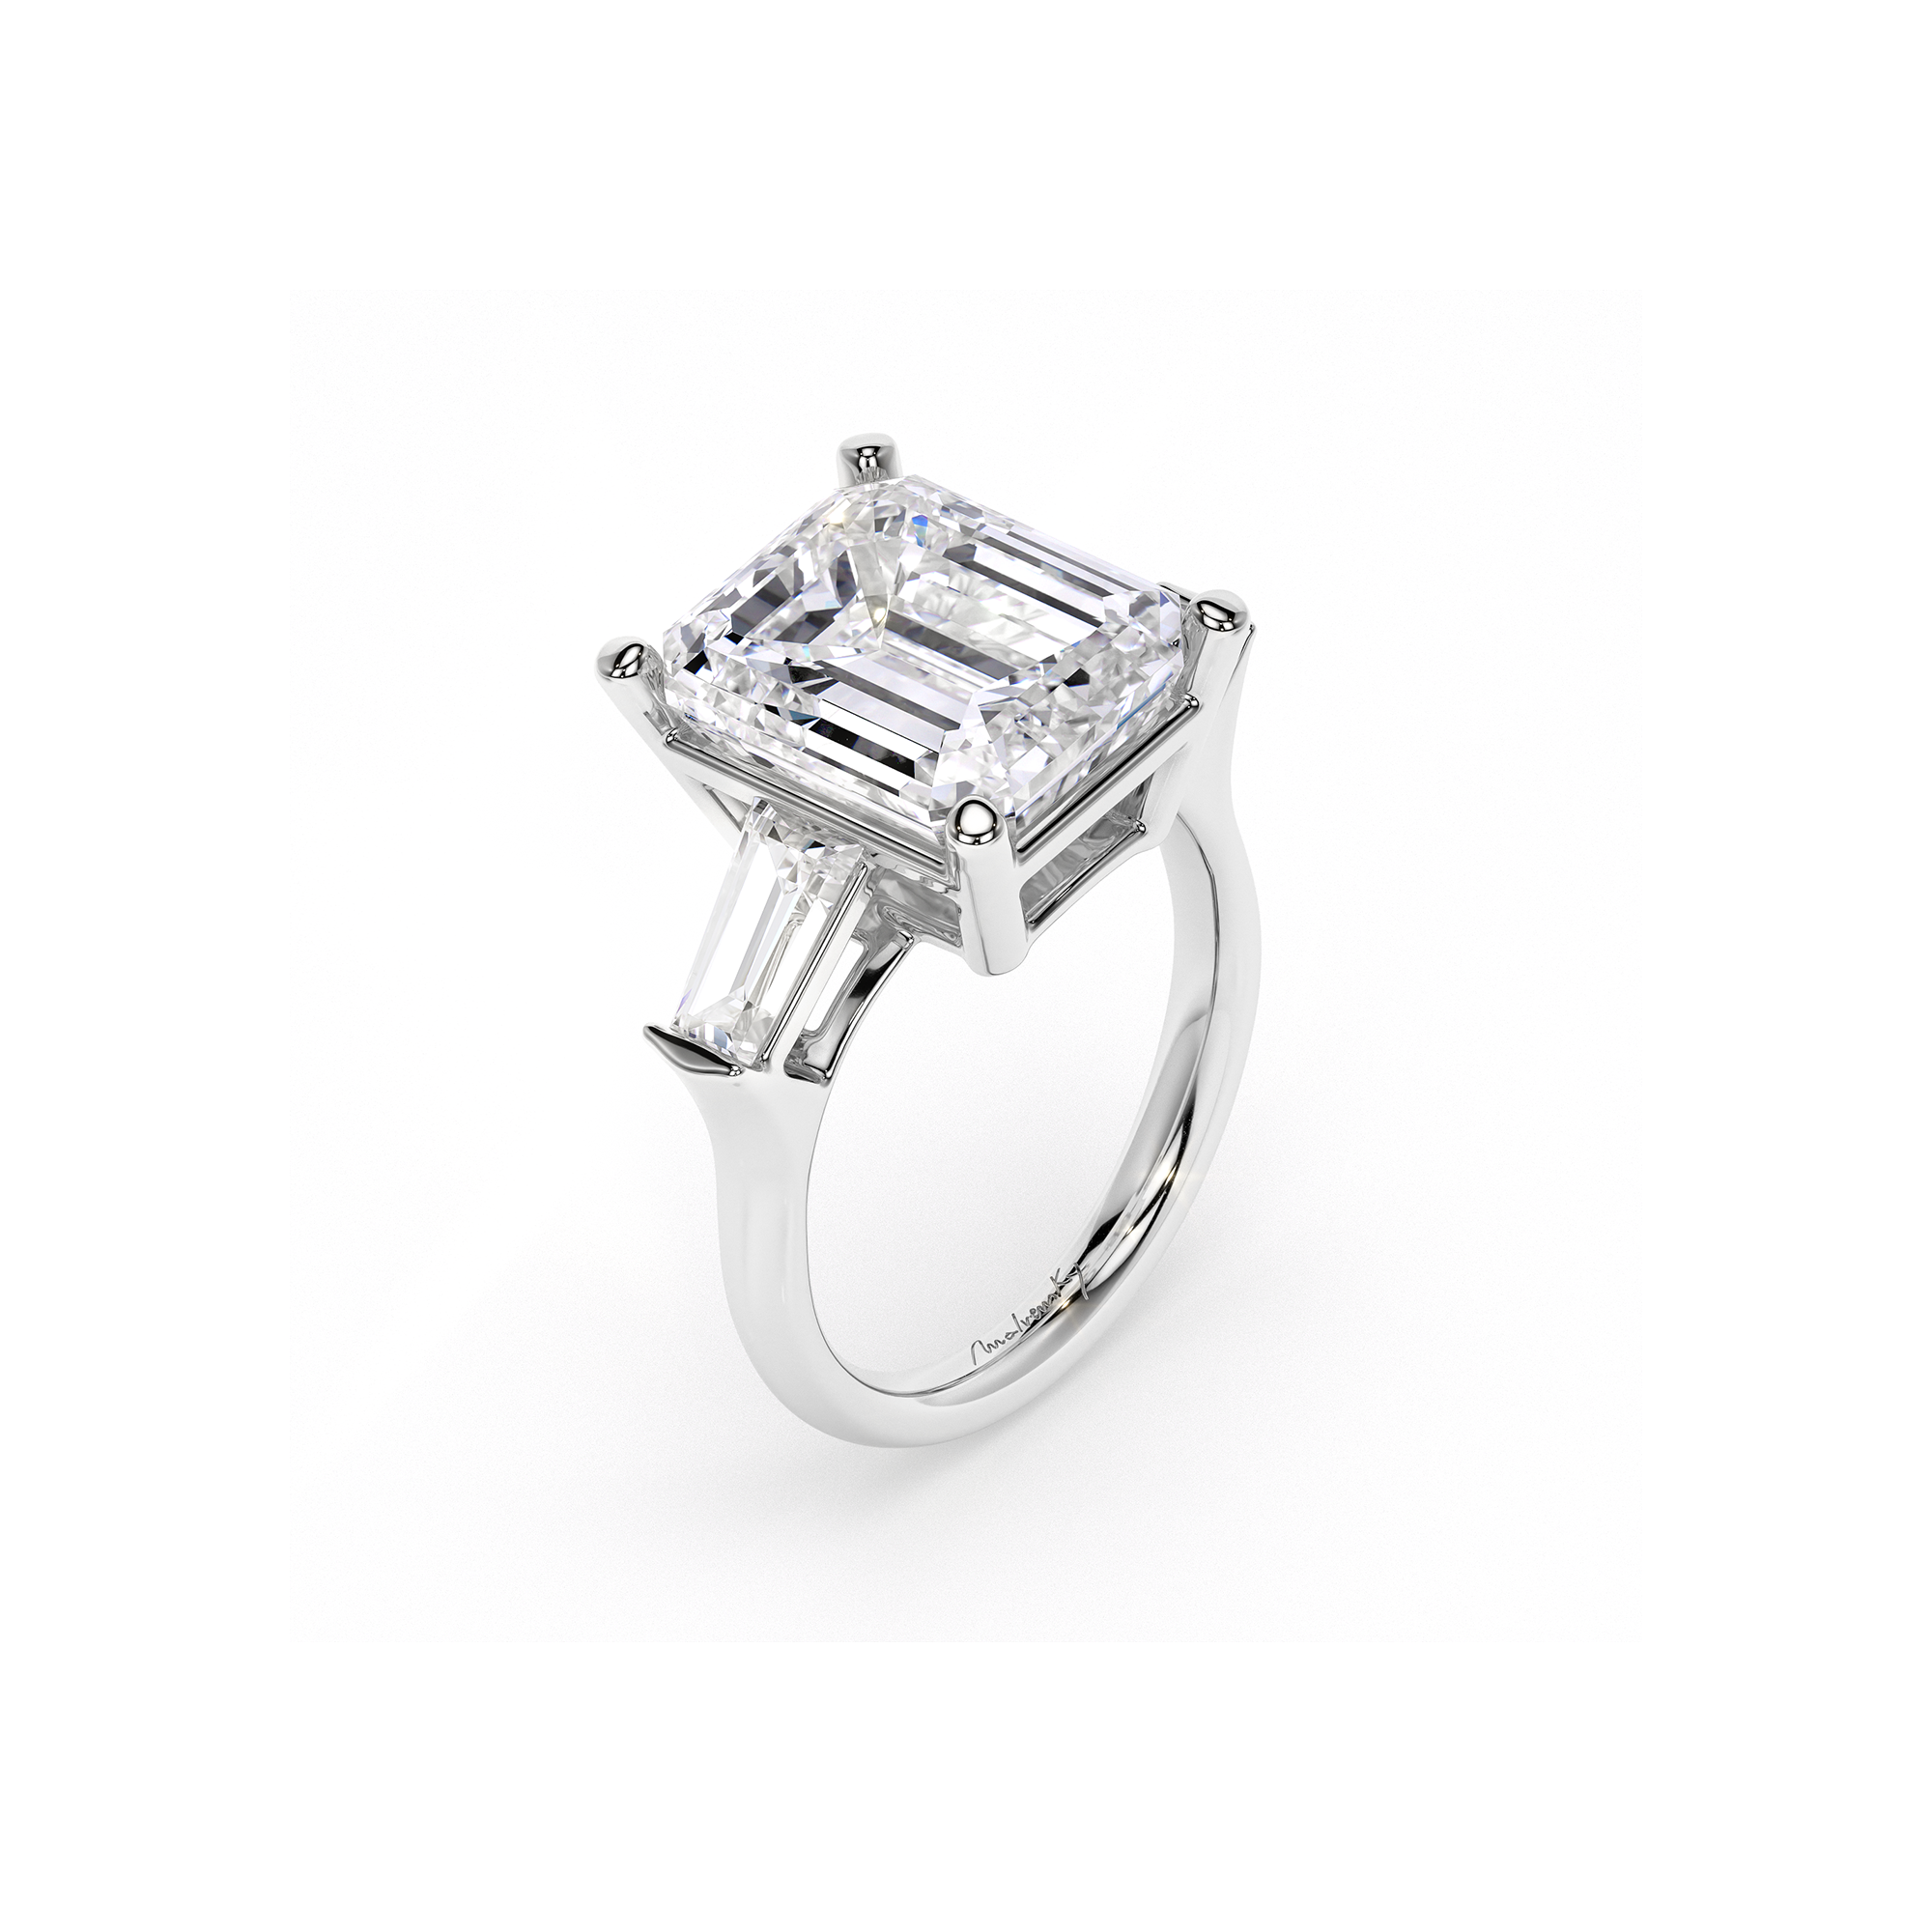 18 KT White Gold Trilogy Engagement Ring Emerald Cut 5.00 CT